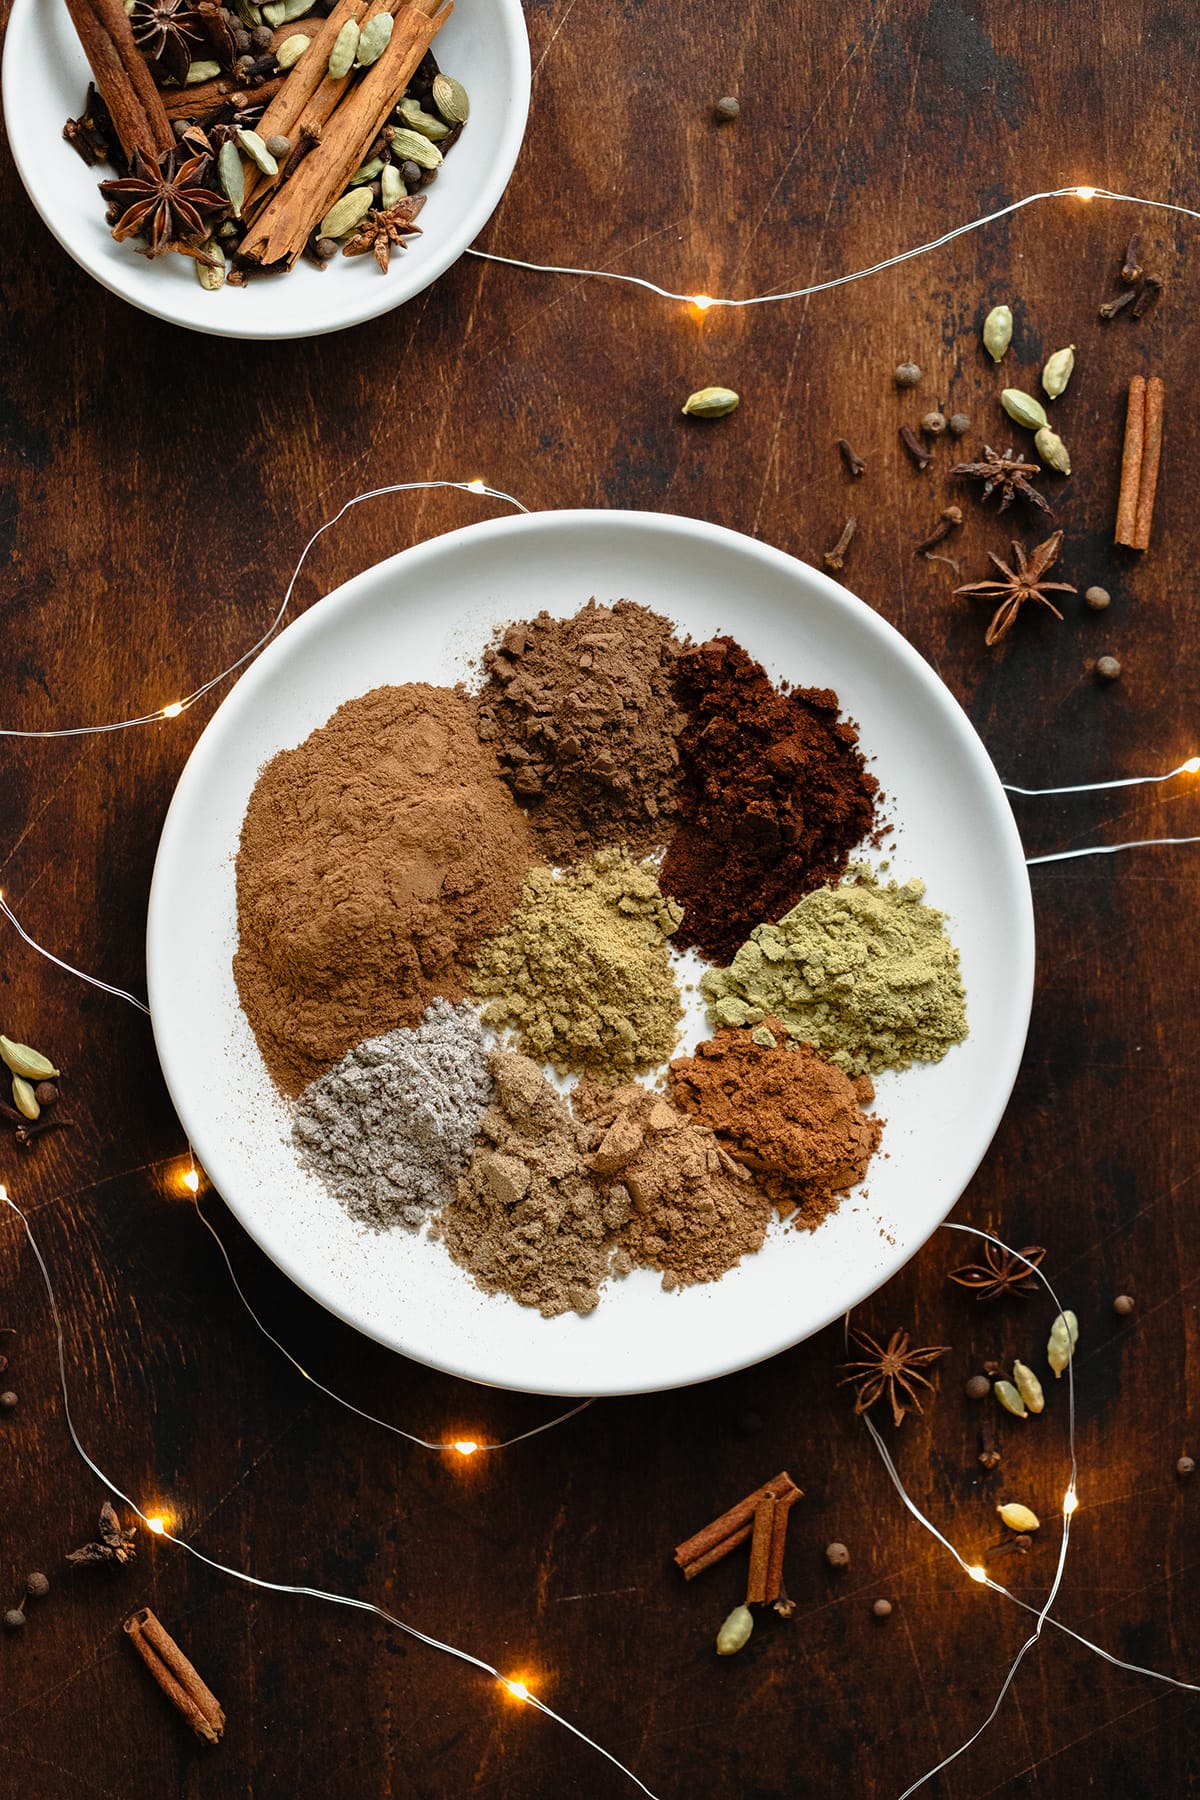 A photo of all the spices used in the Christmas Spice Blend on a white plate. On a dark wooden background.